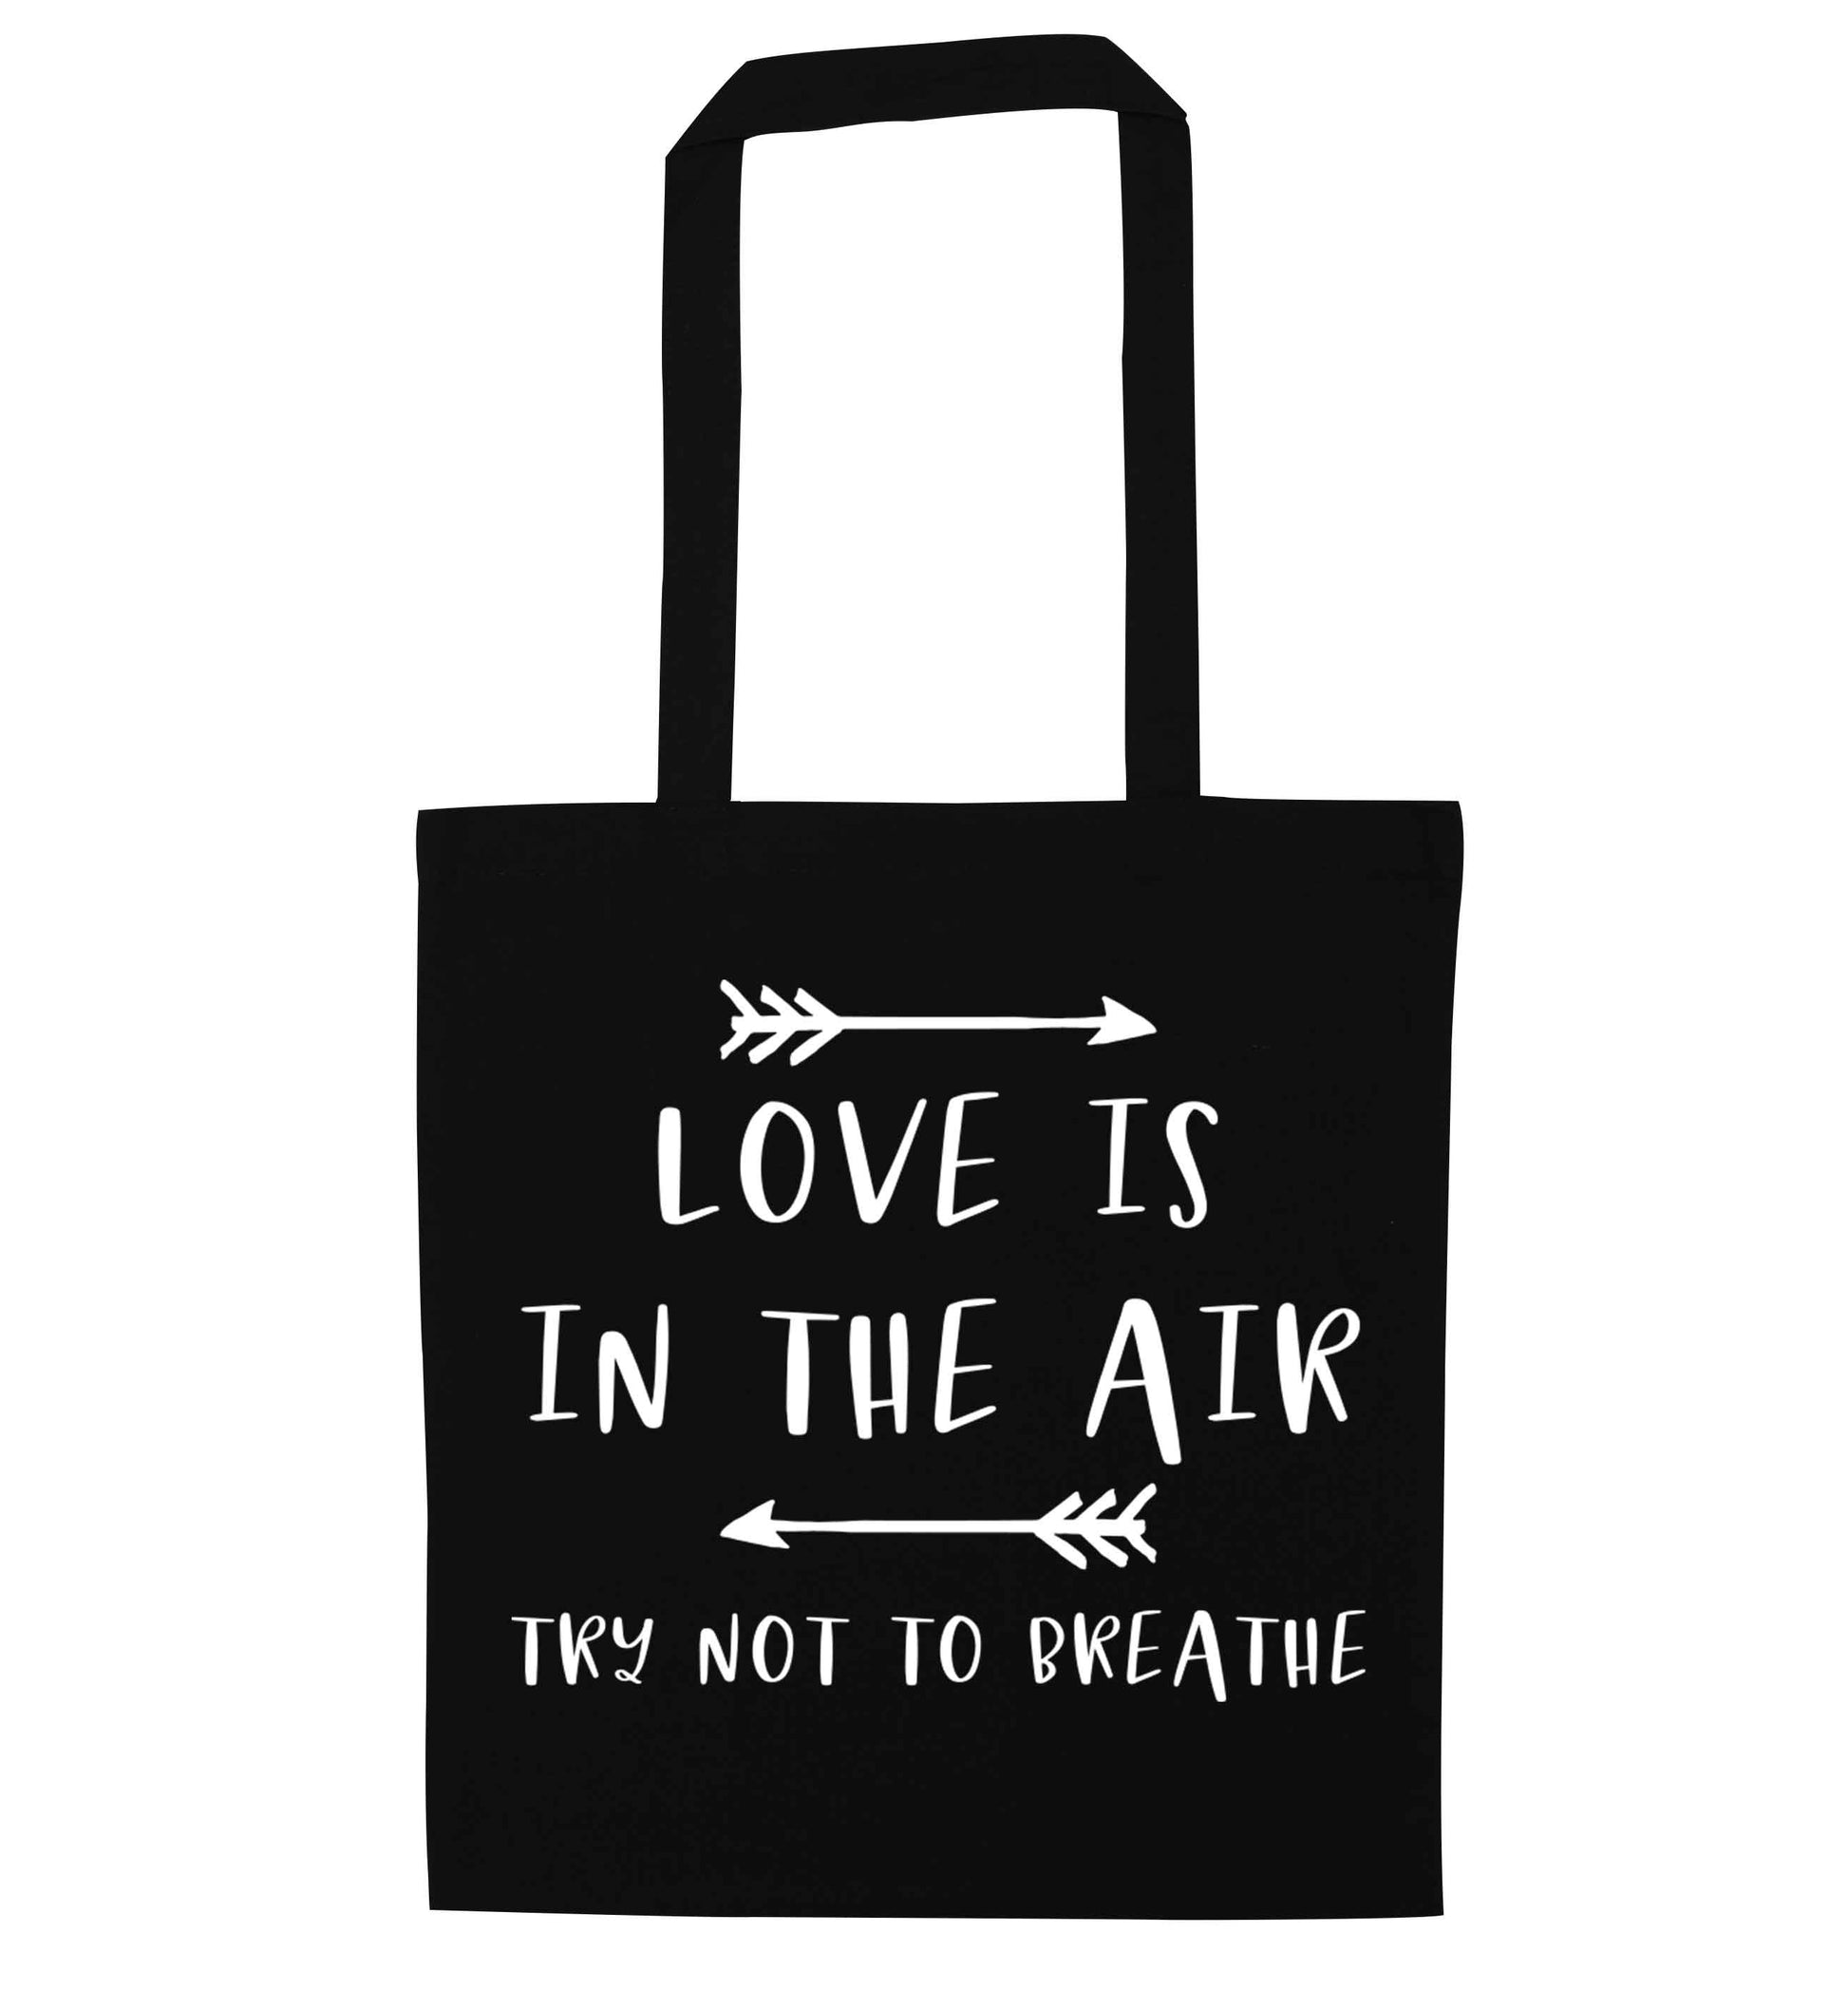 Love is in the air try not to breathe black tote bag